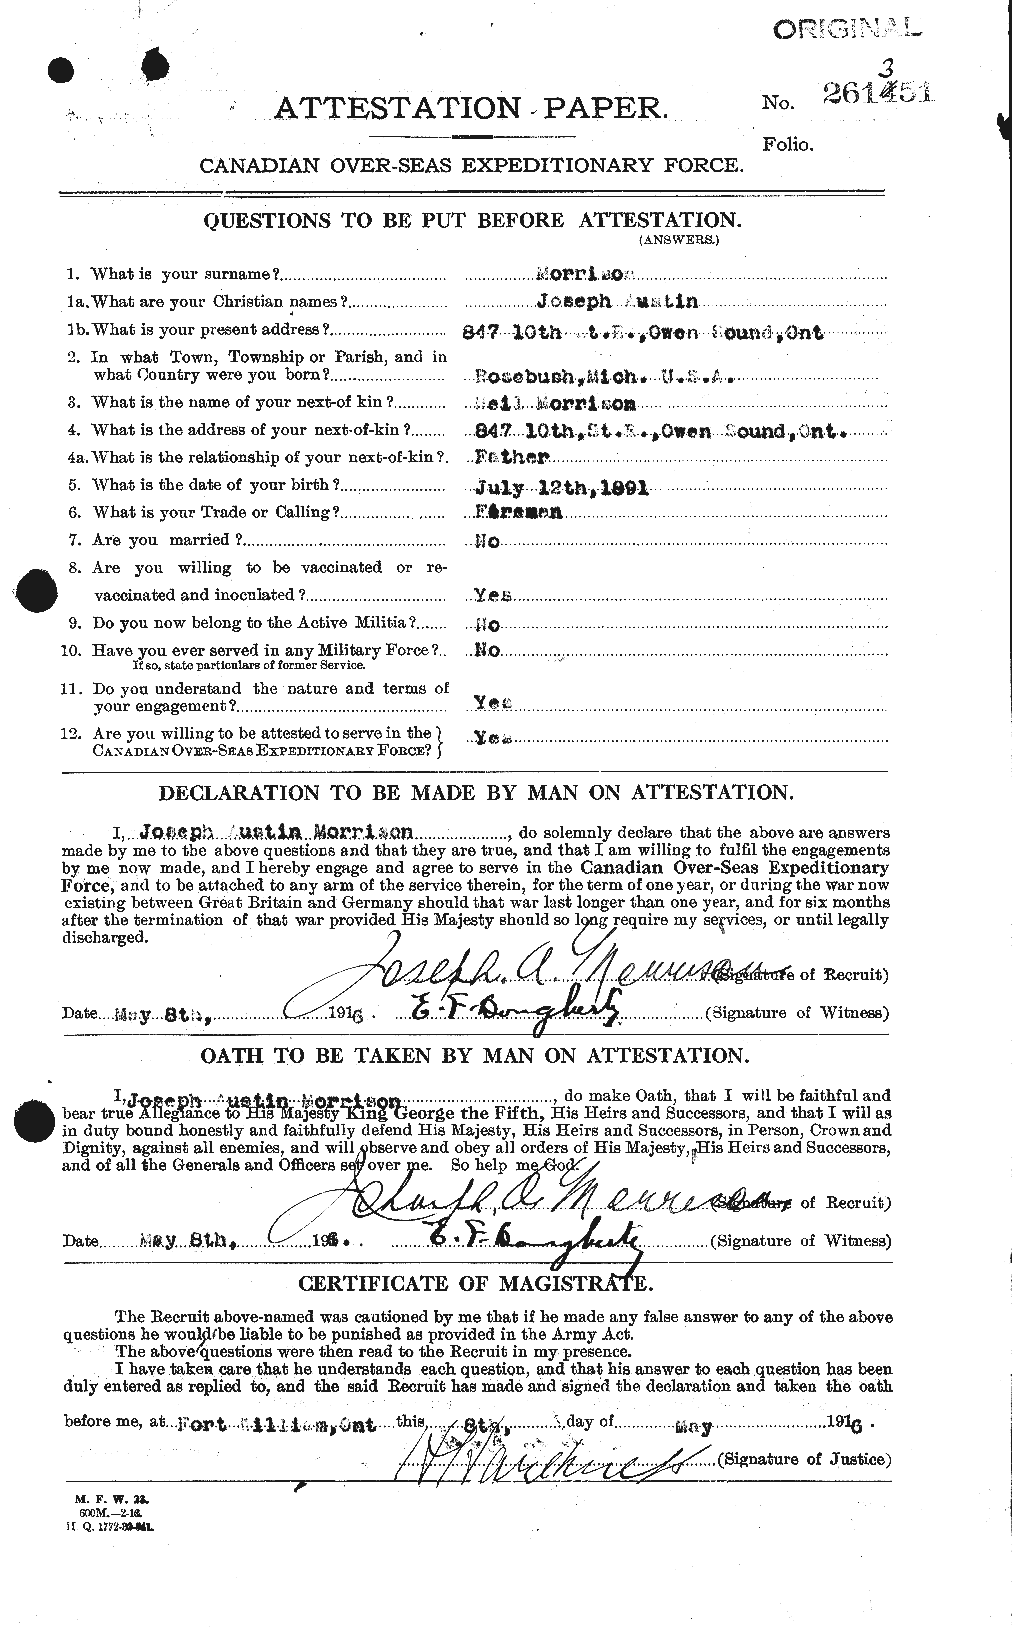 Personnel Records of the First World War - CEF 507090a